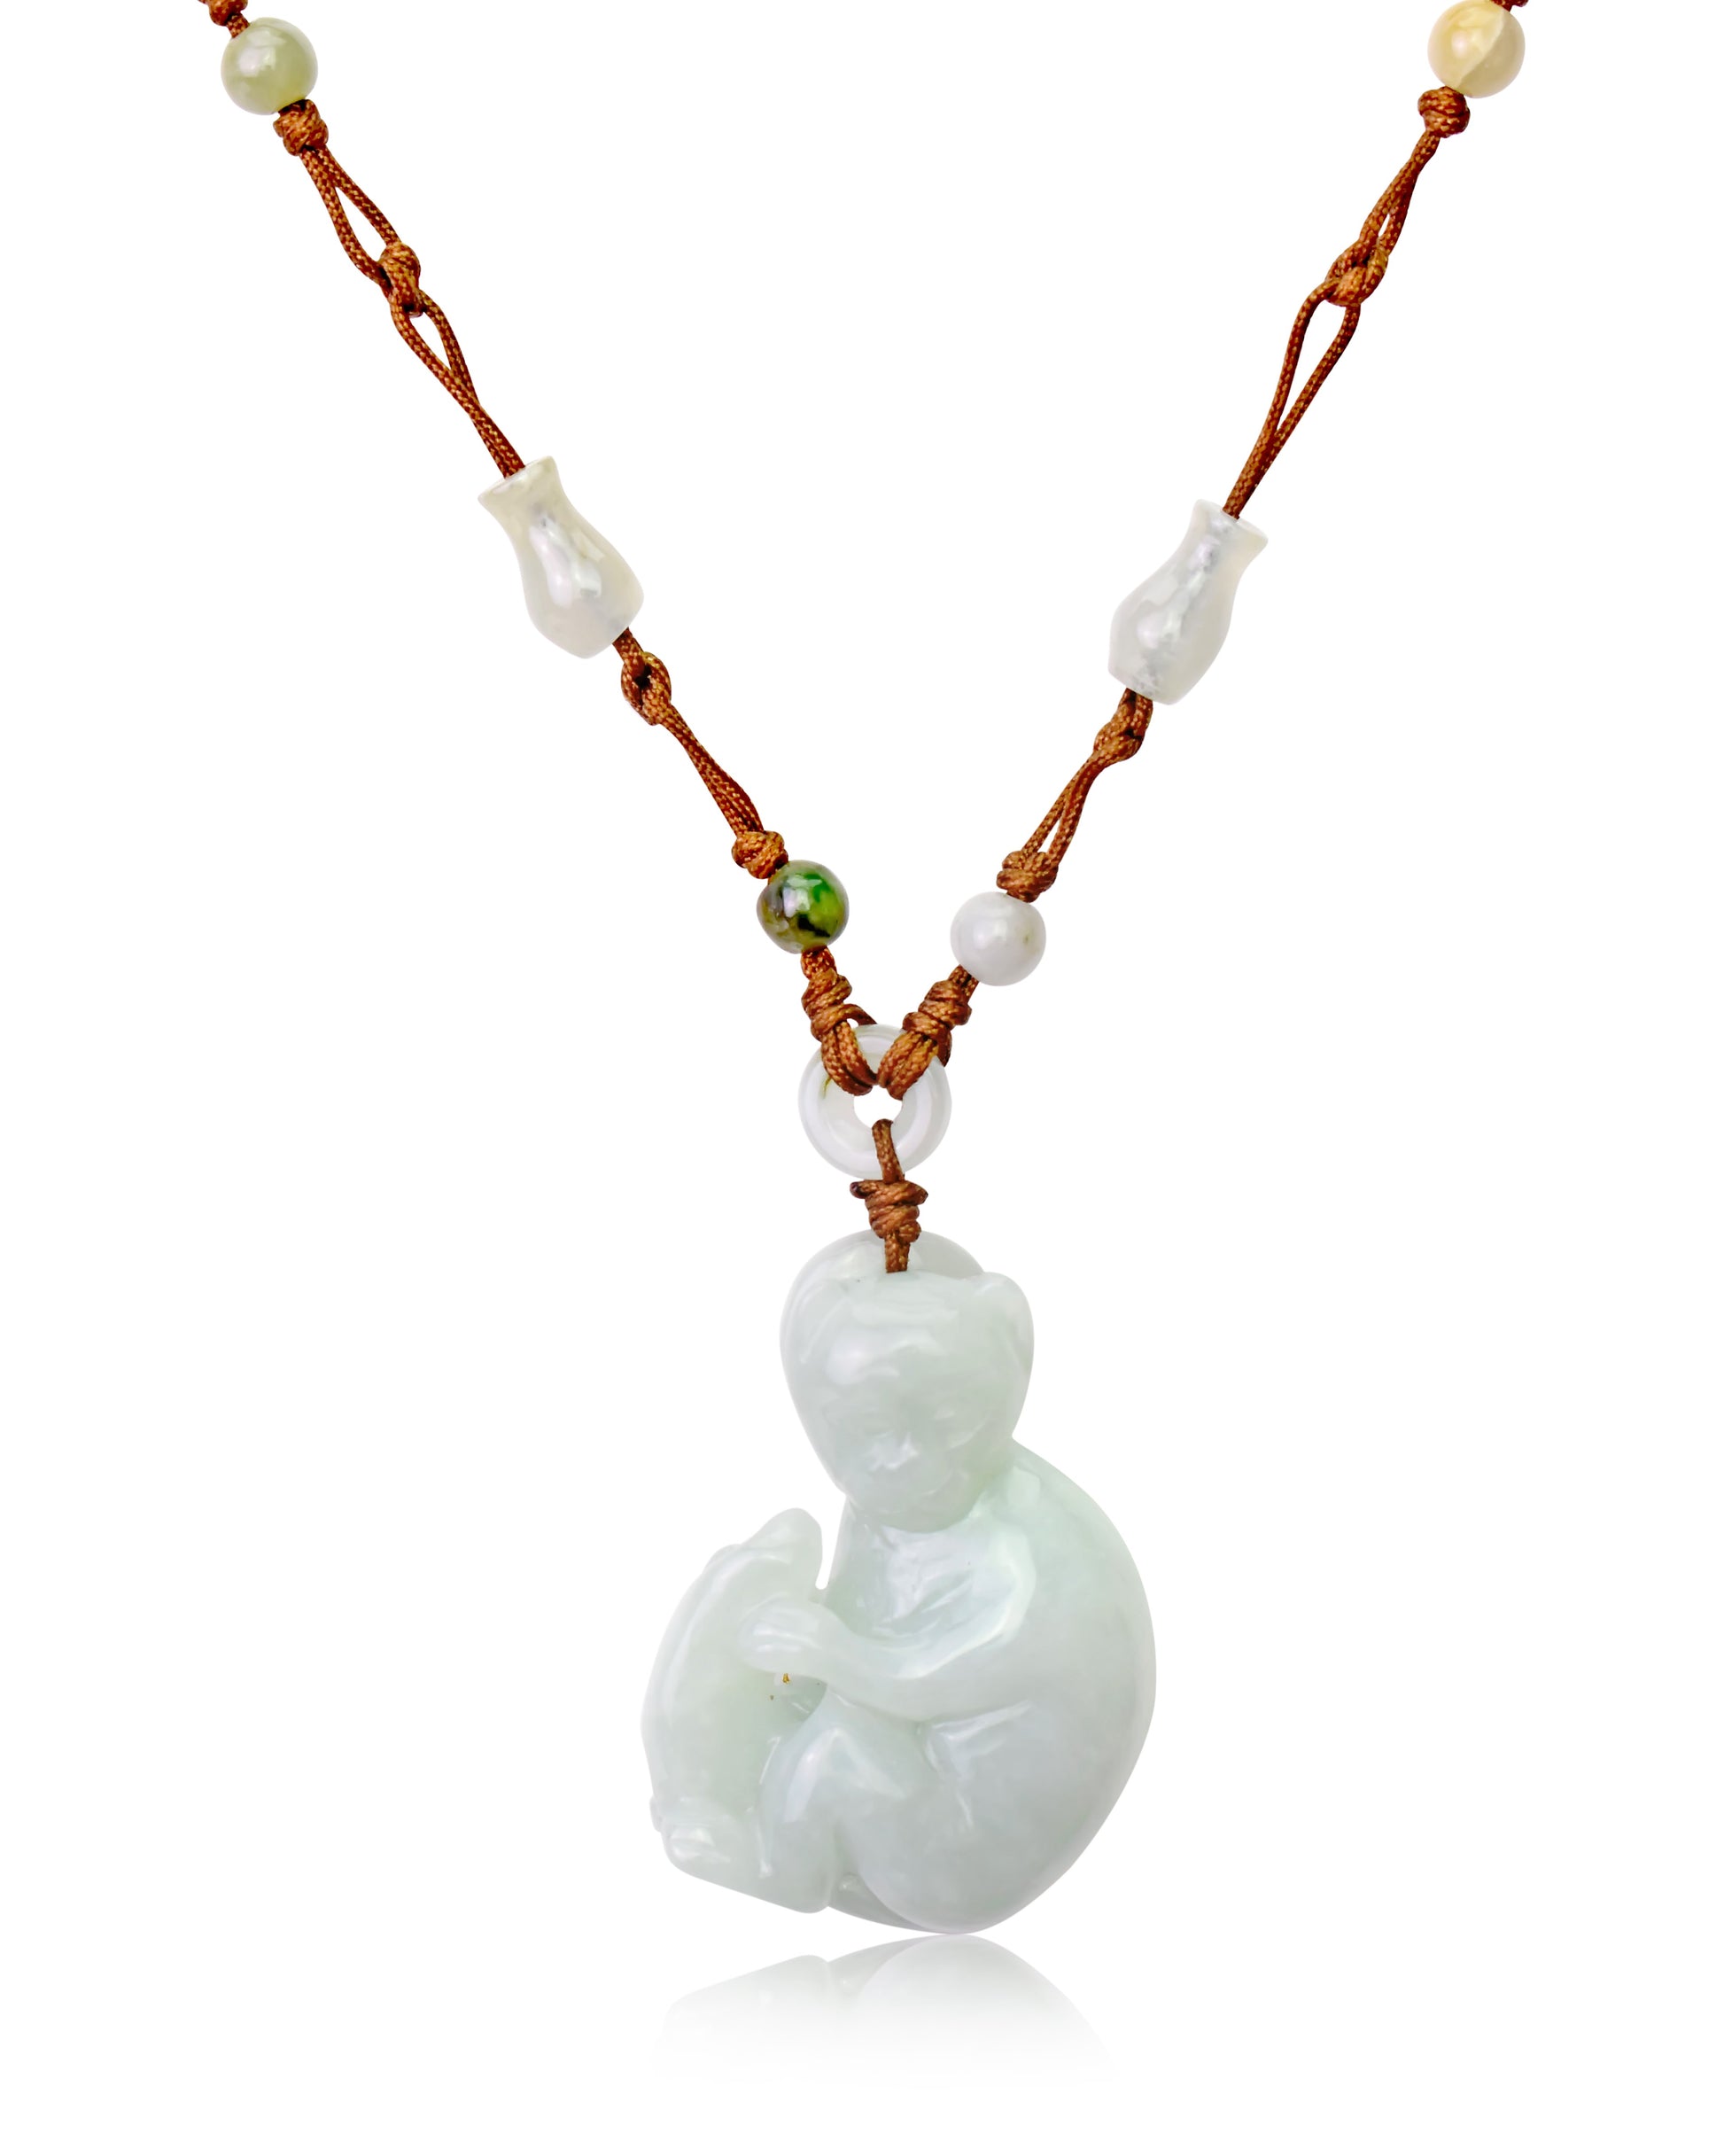 Unique Handmade Jewelry: Banana Monkey Jade Necklace made with Brown Cord